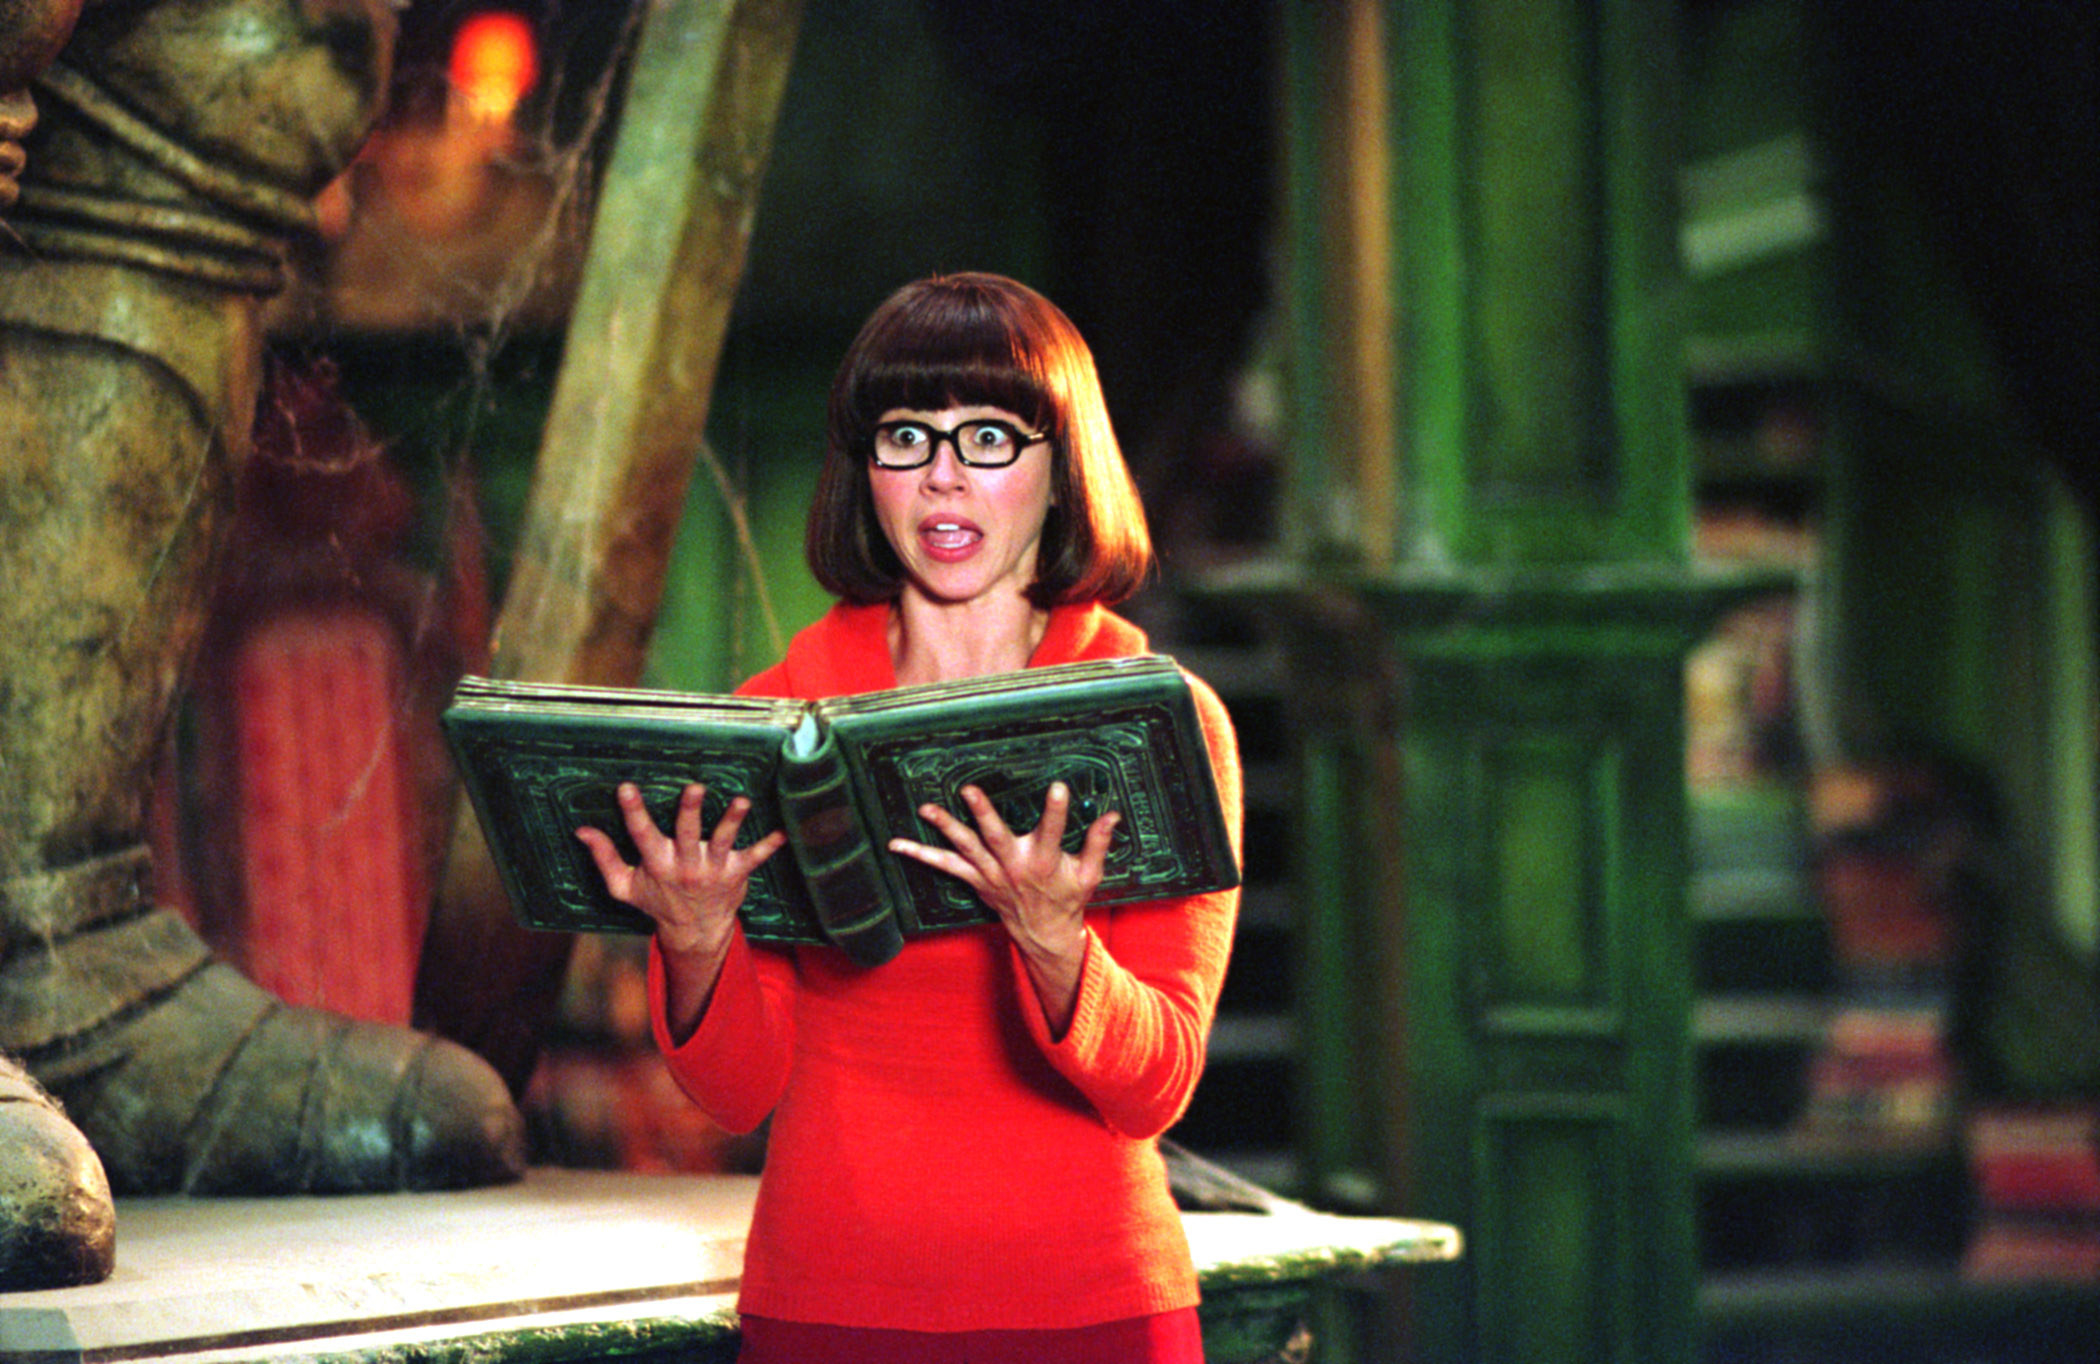 Velma holding a book in the live-action film